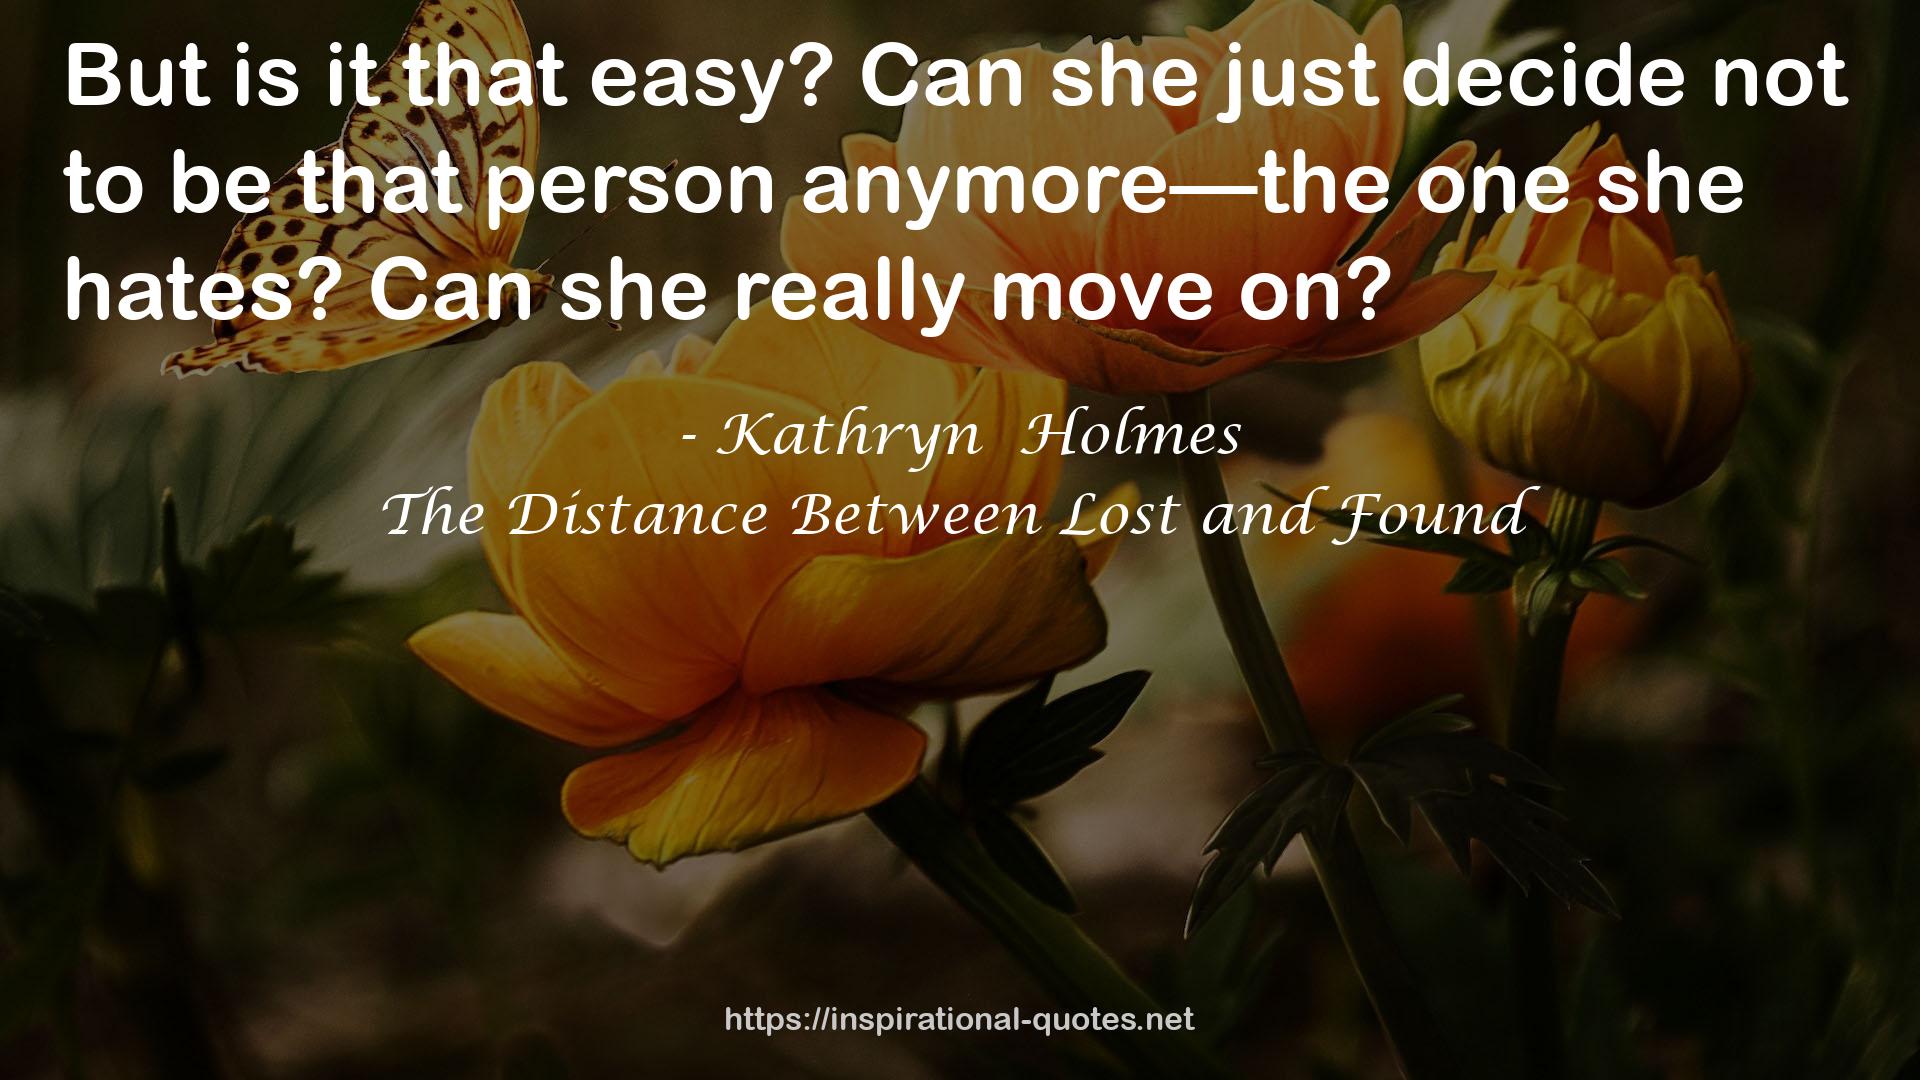 The Distance Between Lost and Found QUOTES